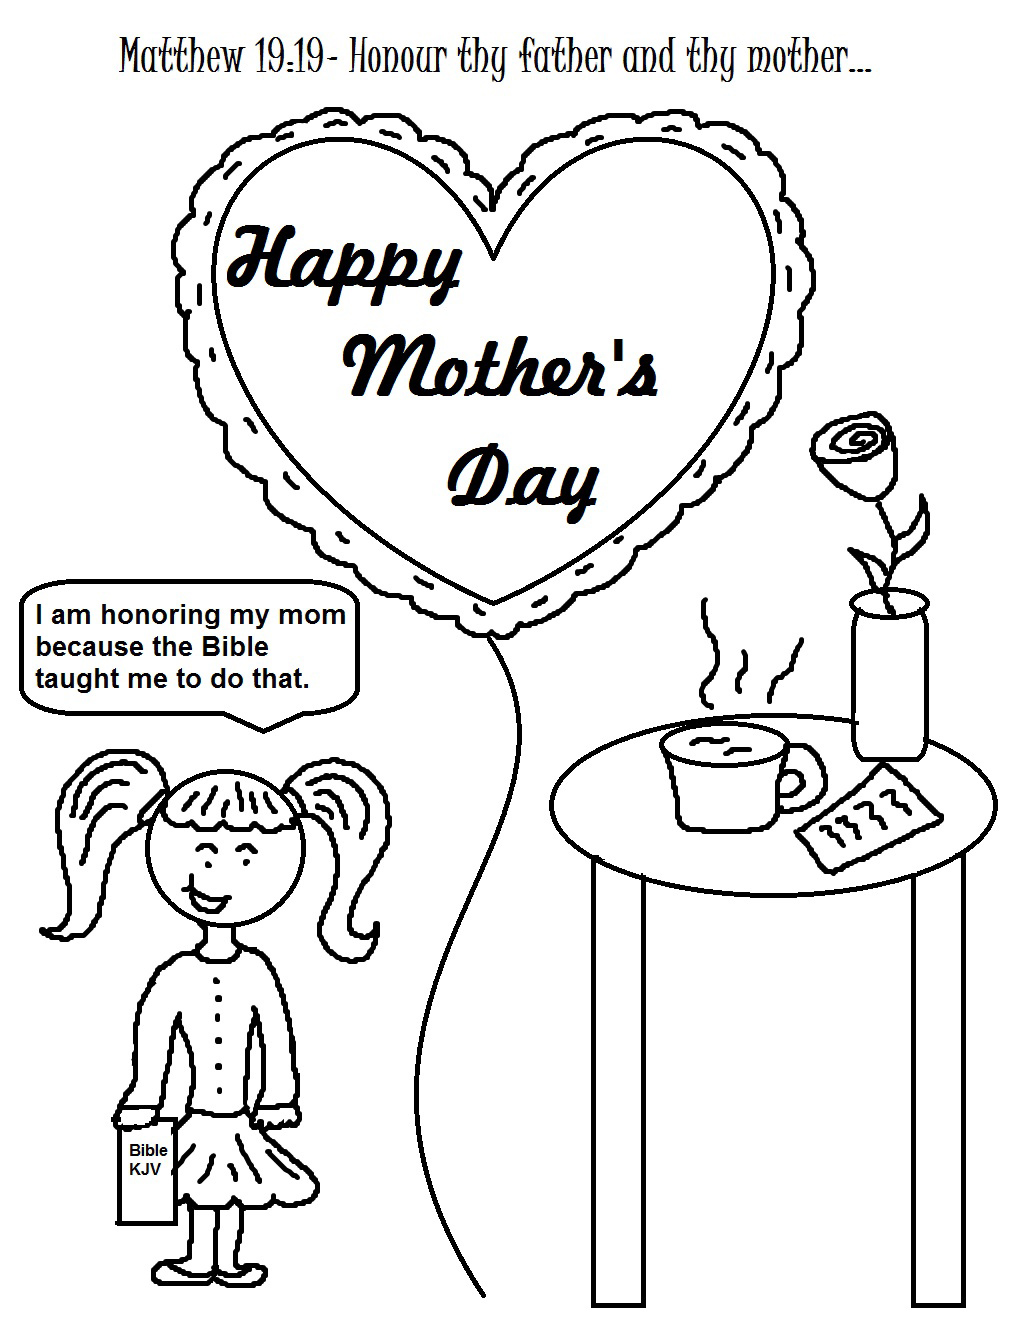 Free Coloring Pages Mothers Day Coloring Pages For Children